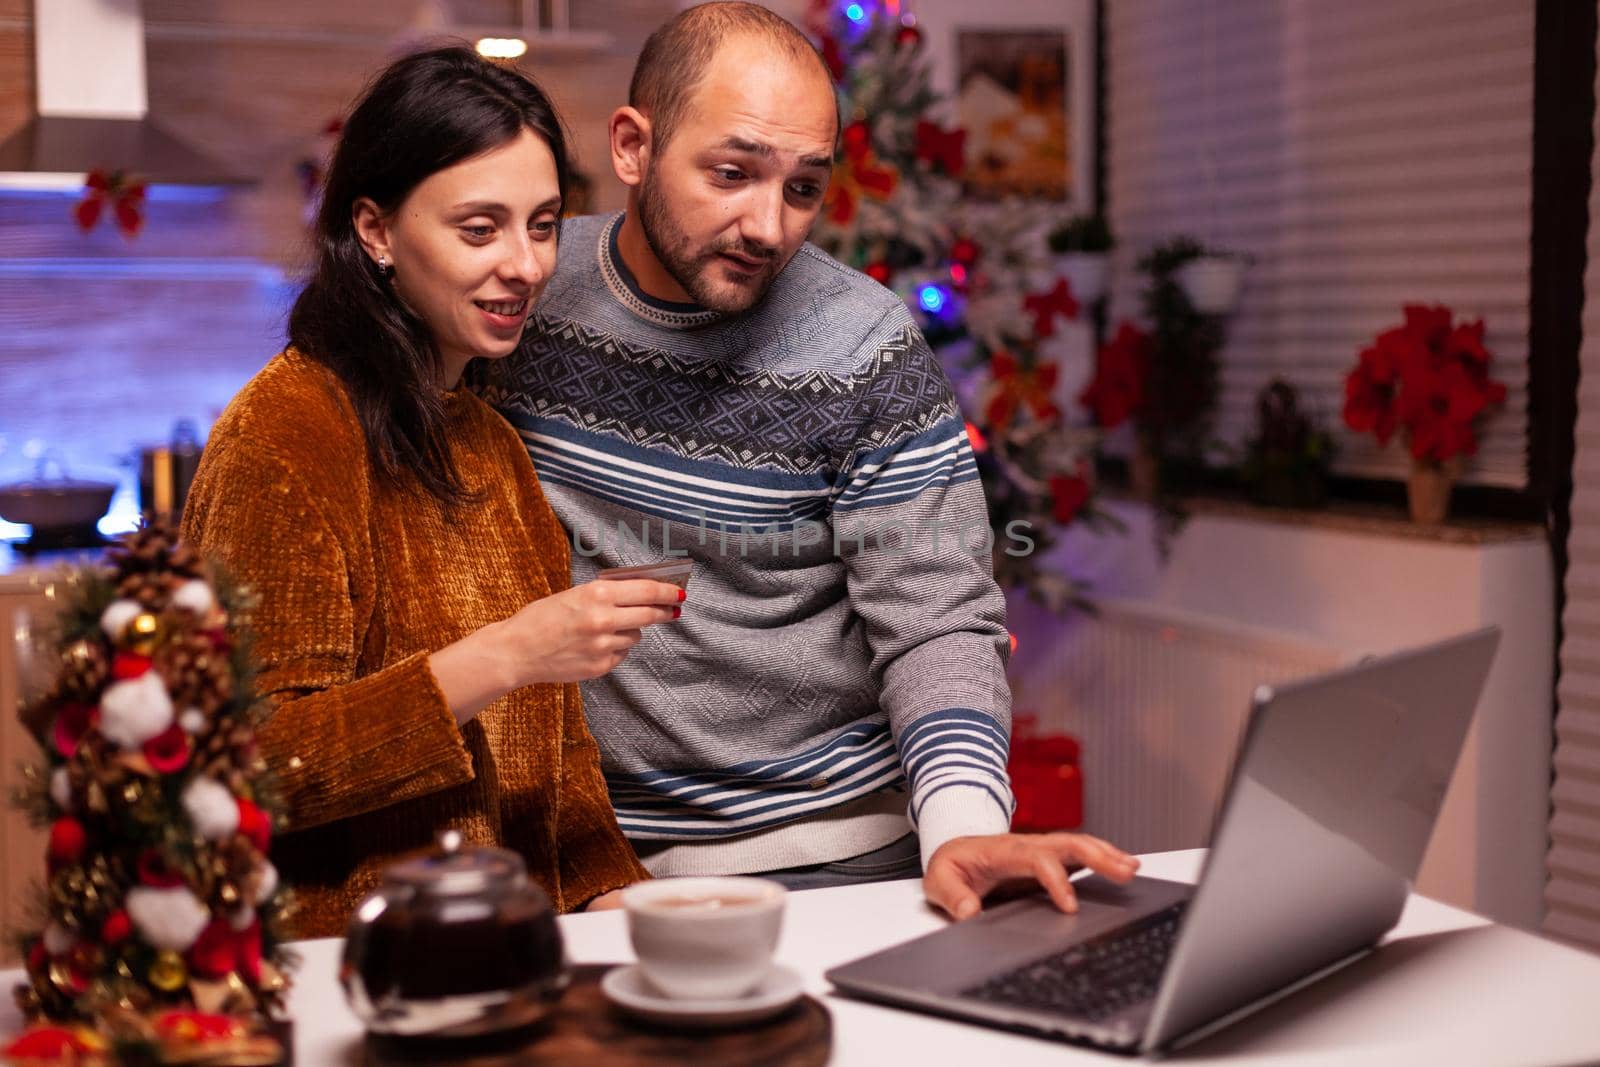 Happy family doing online shopping buying xmas present using credit card making transaction using laptop computer x-mas decorated kitchen. Cheerful family celebrating christmas holiday season together